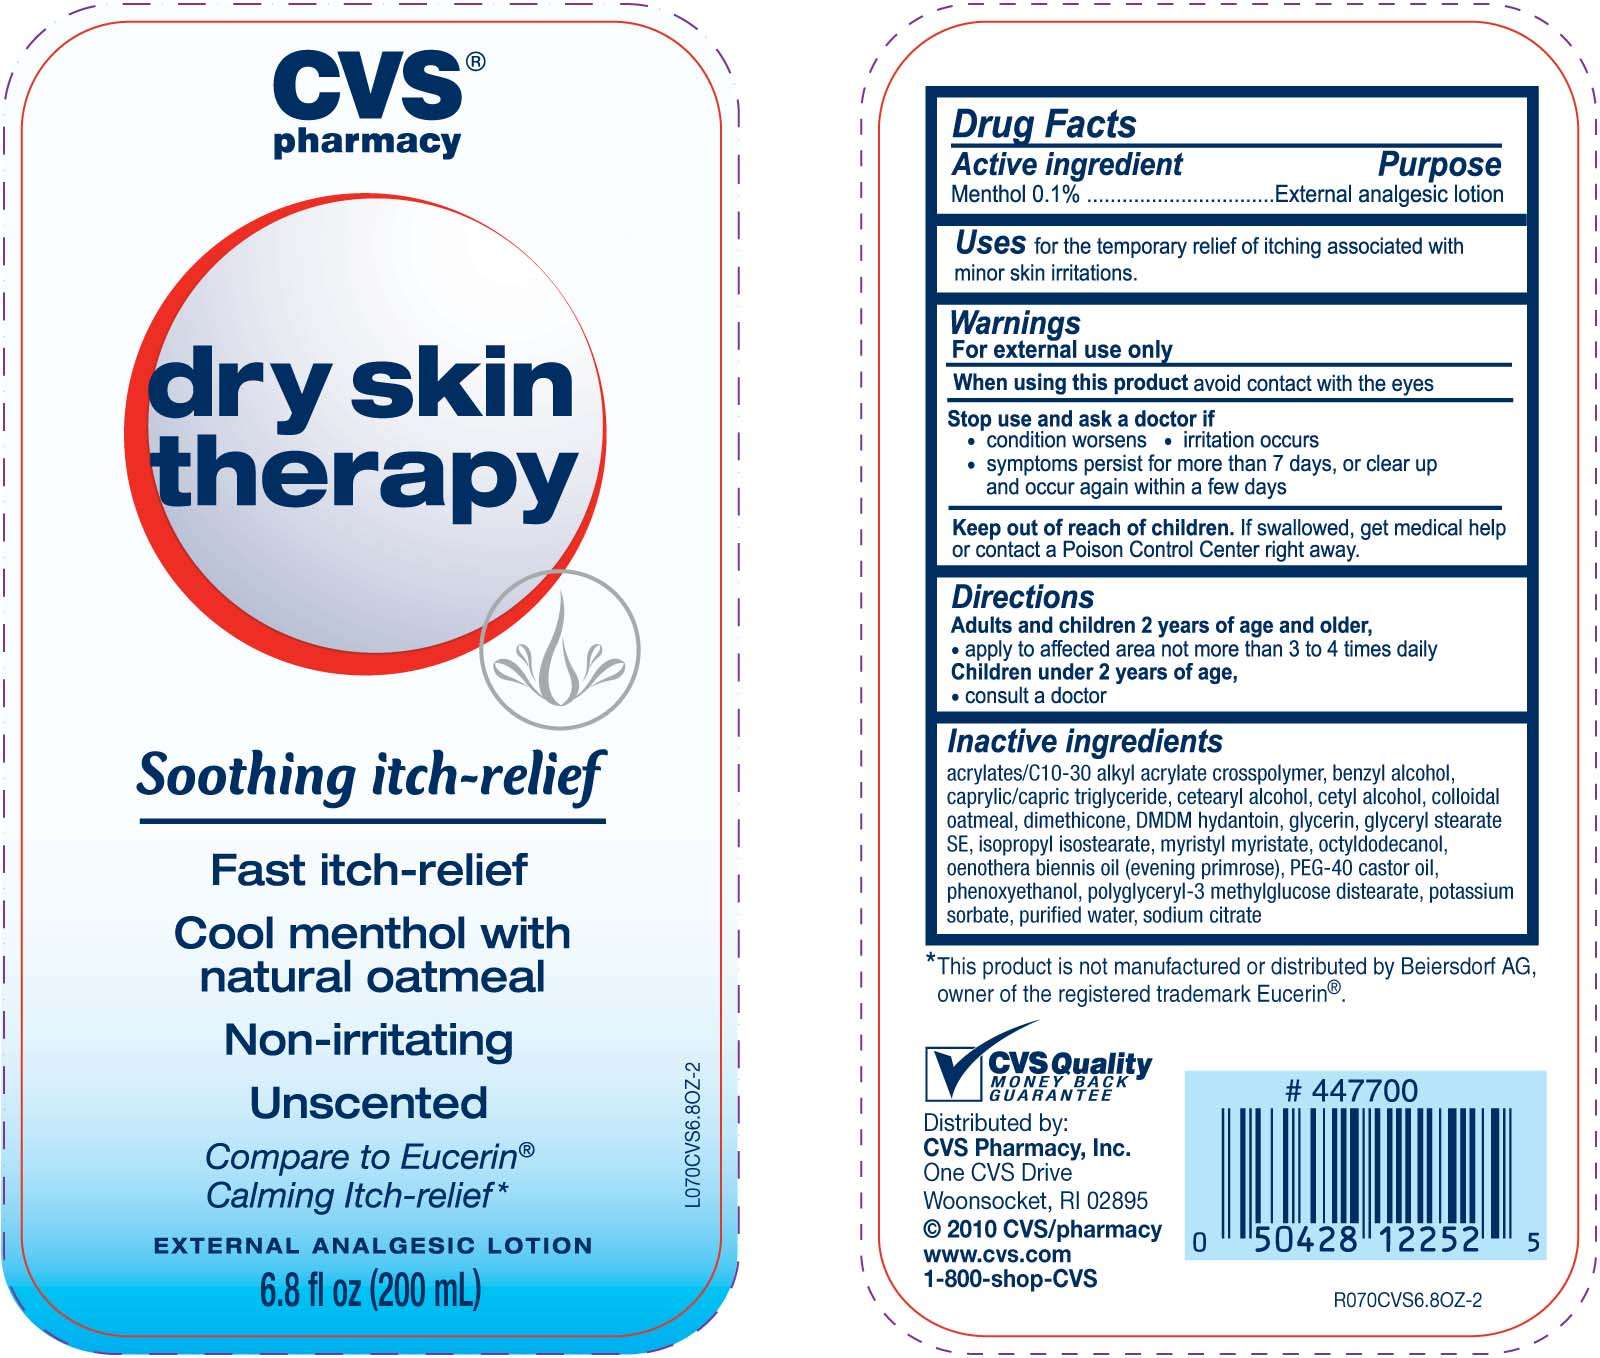 CVS Soothing Itch Relief